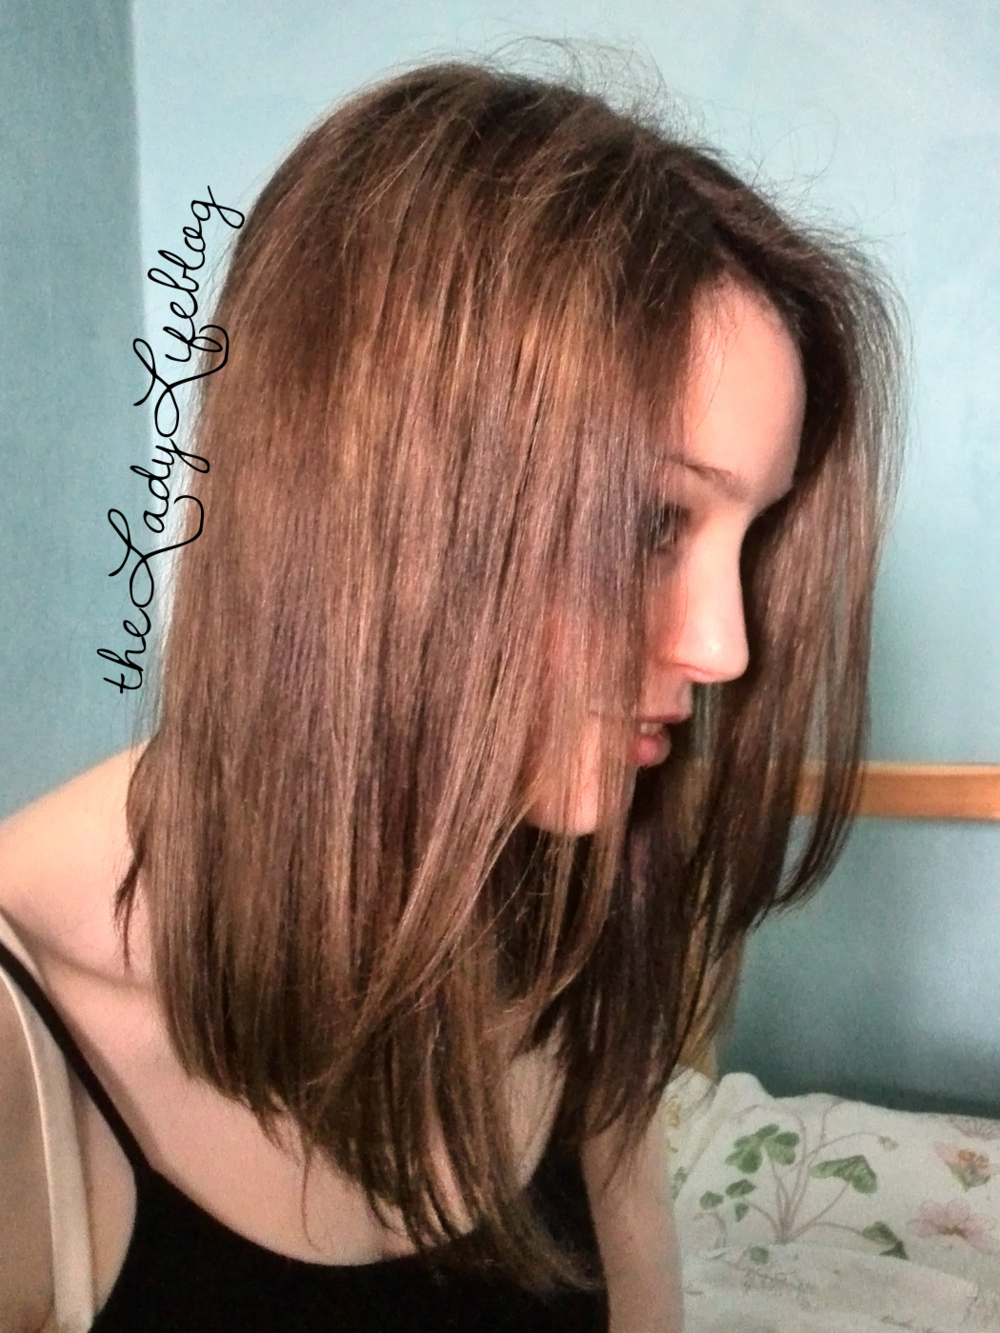 VS Vidal Sassoon Salonist Review From Blonde To Brown With